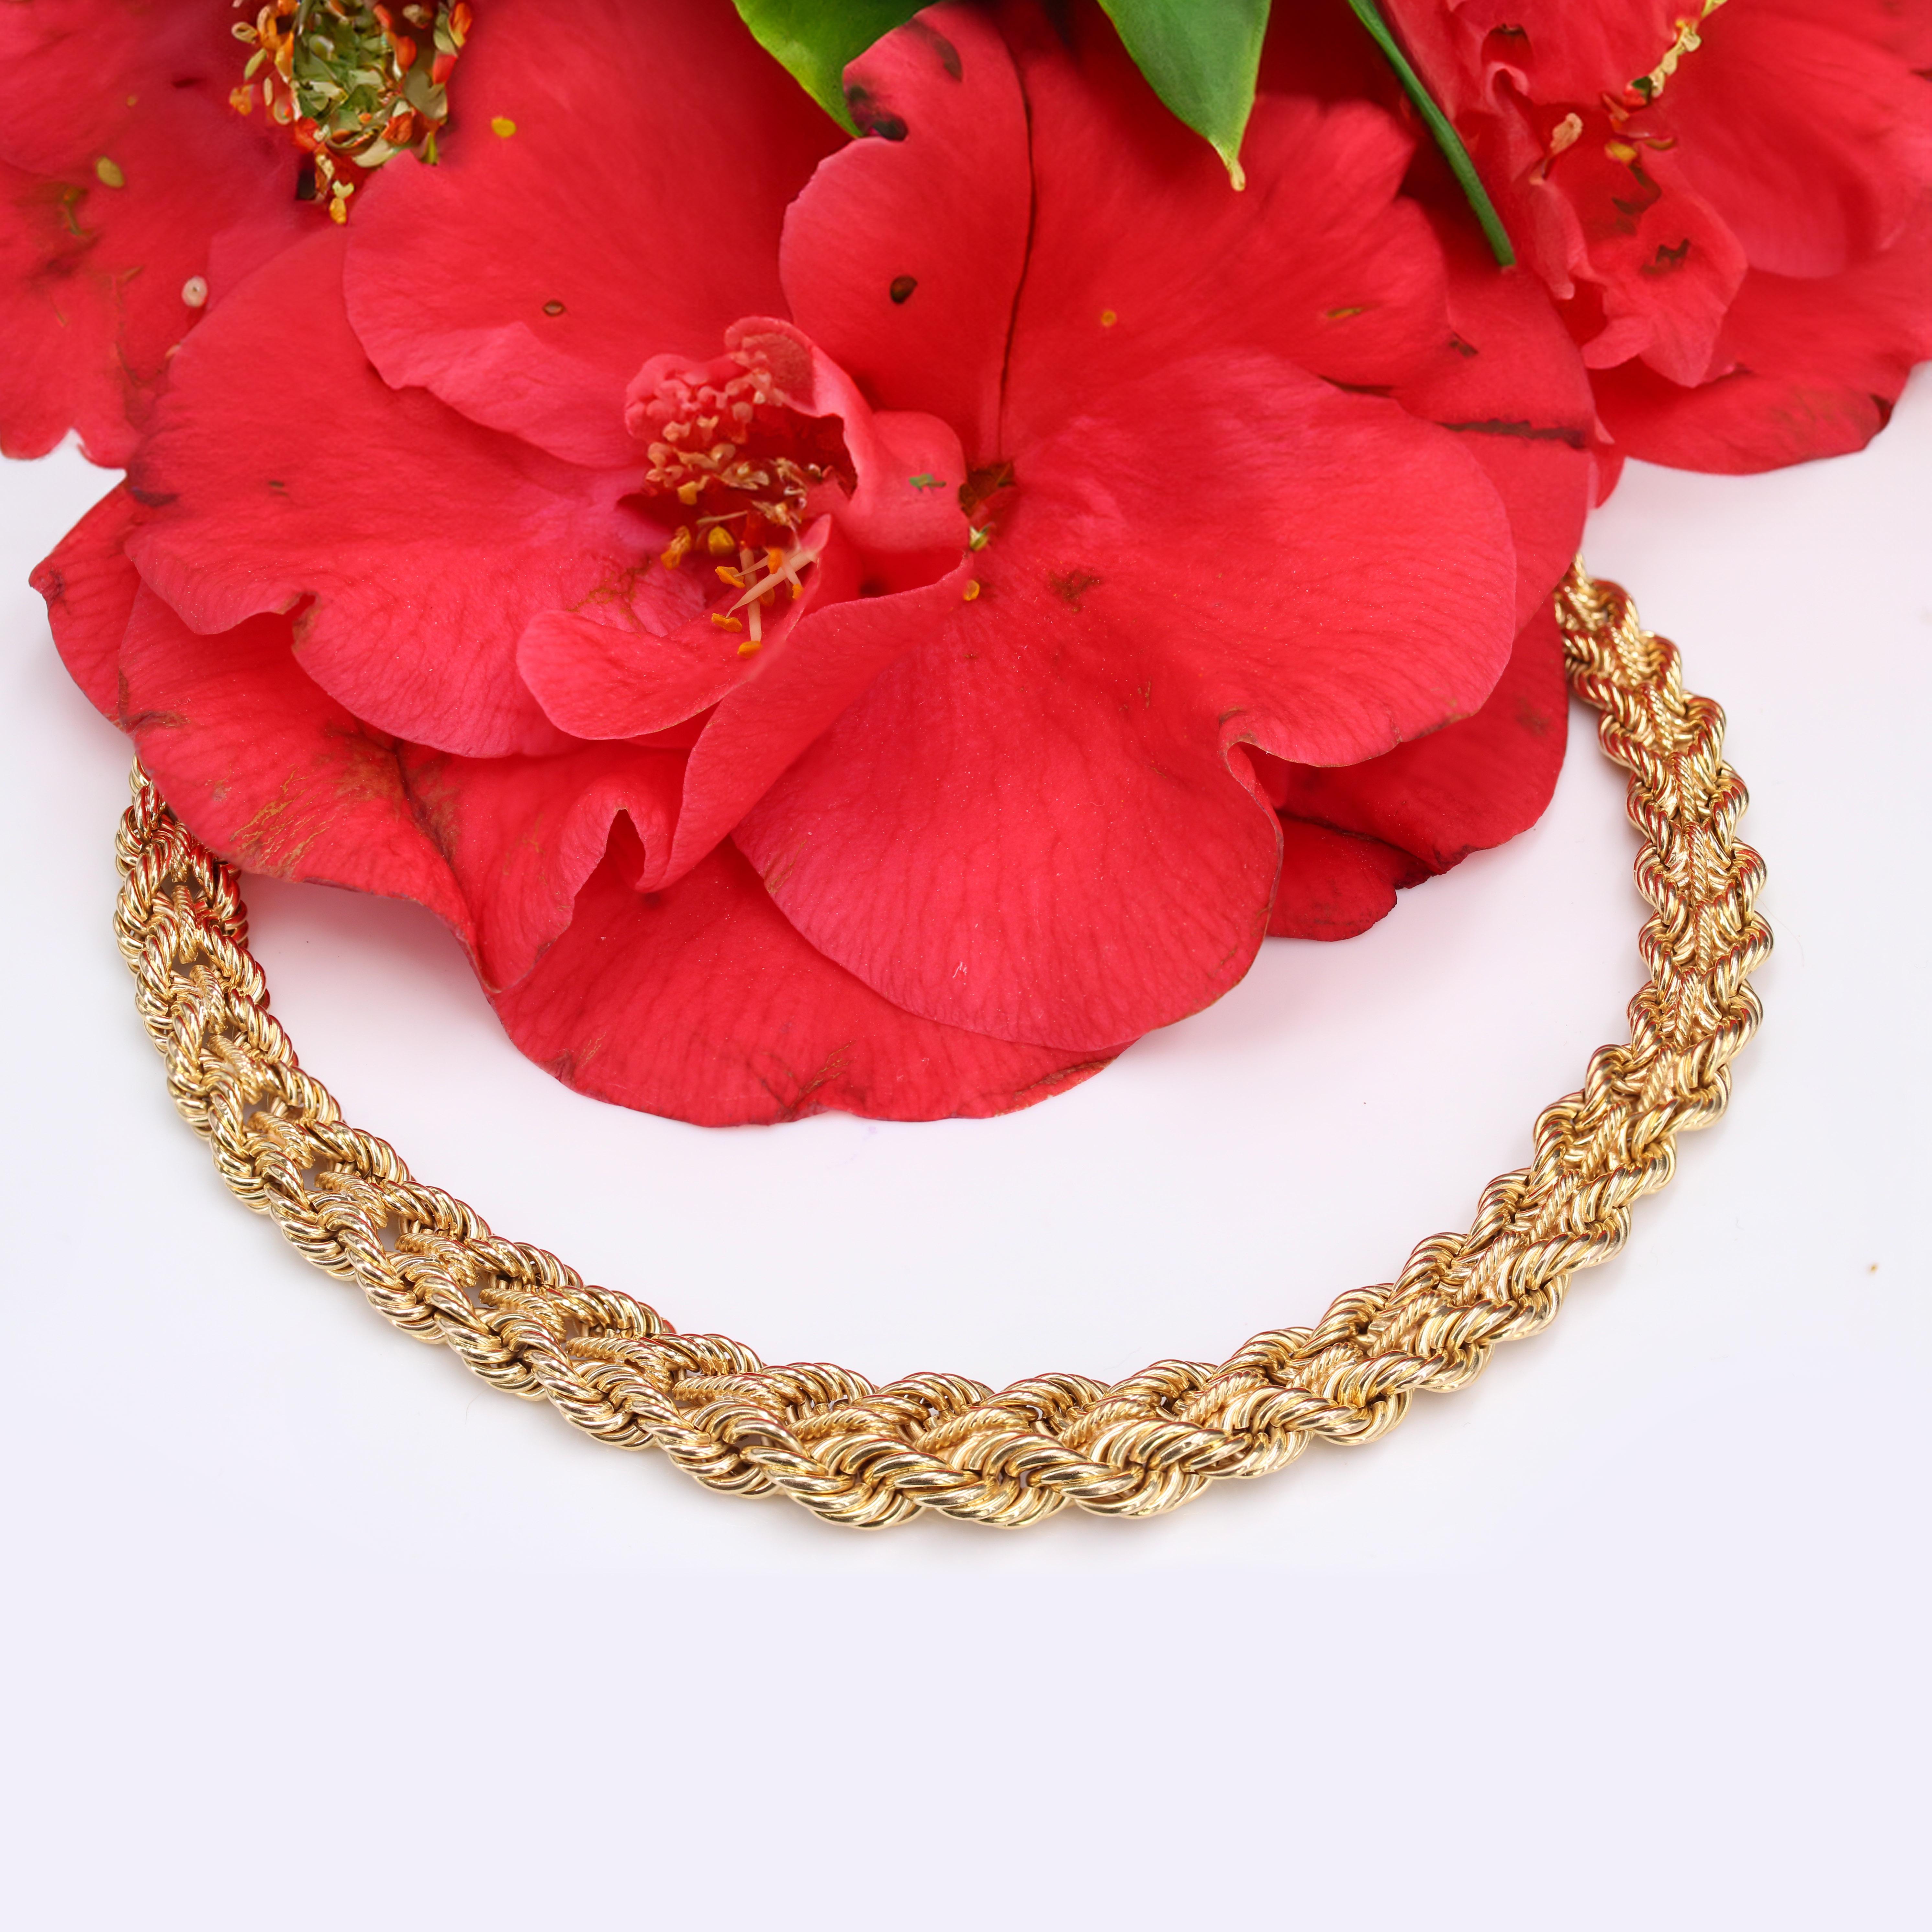 Retro French 1950s 18 Karat Yellow Gold Falling Braided Choker Necklace For Sale